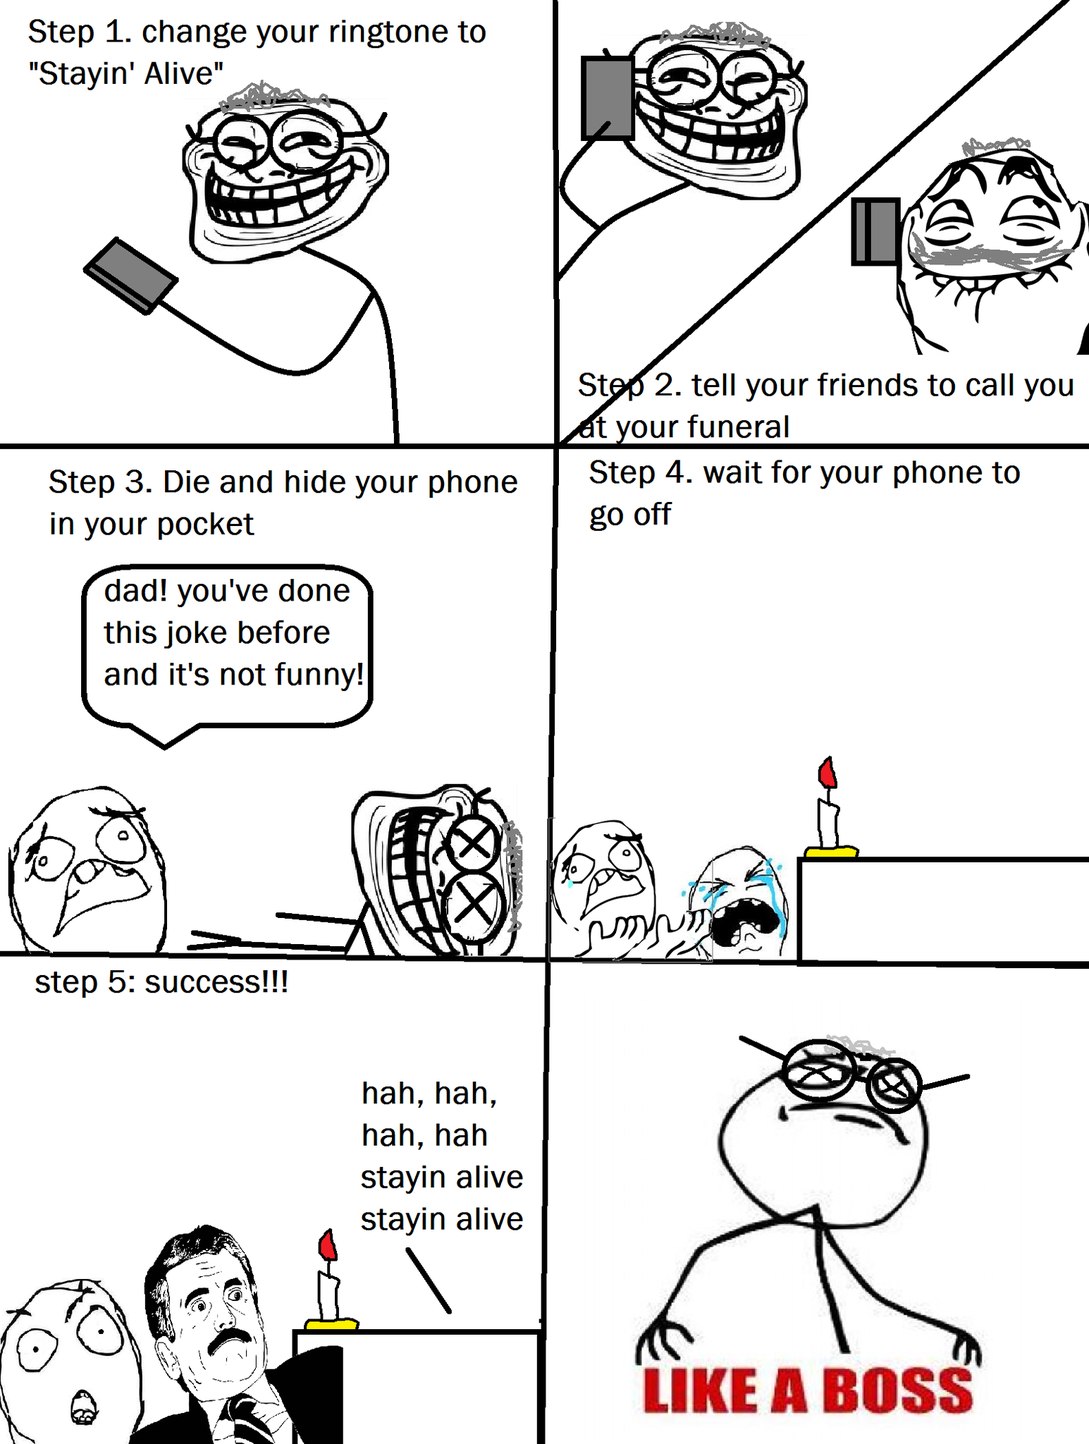 How To: Troll at your funeral - meme